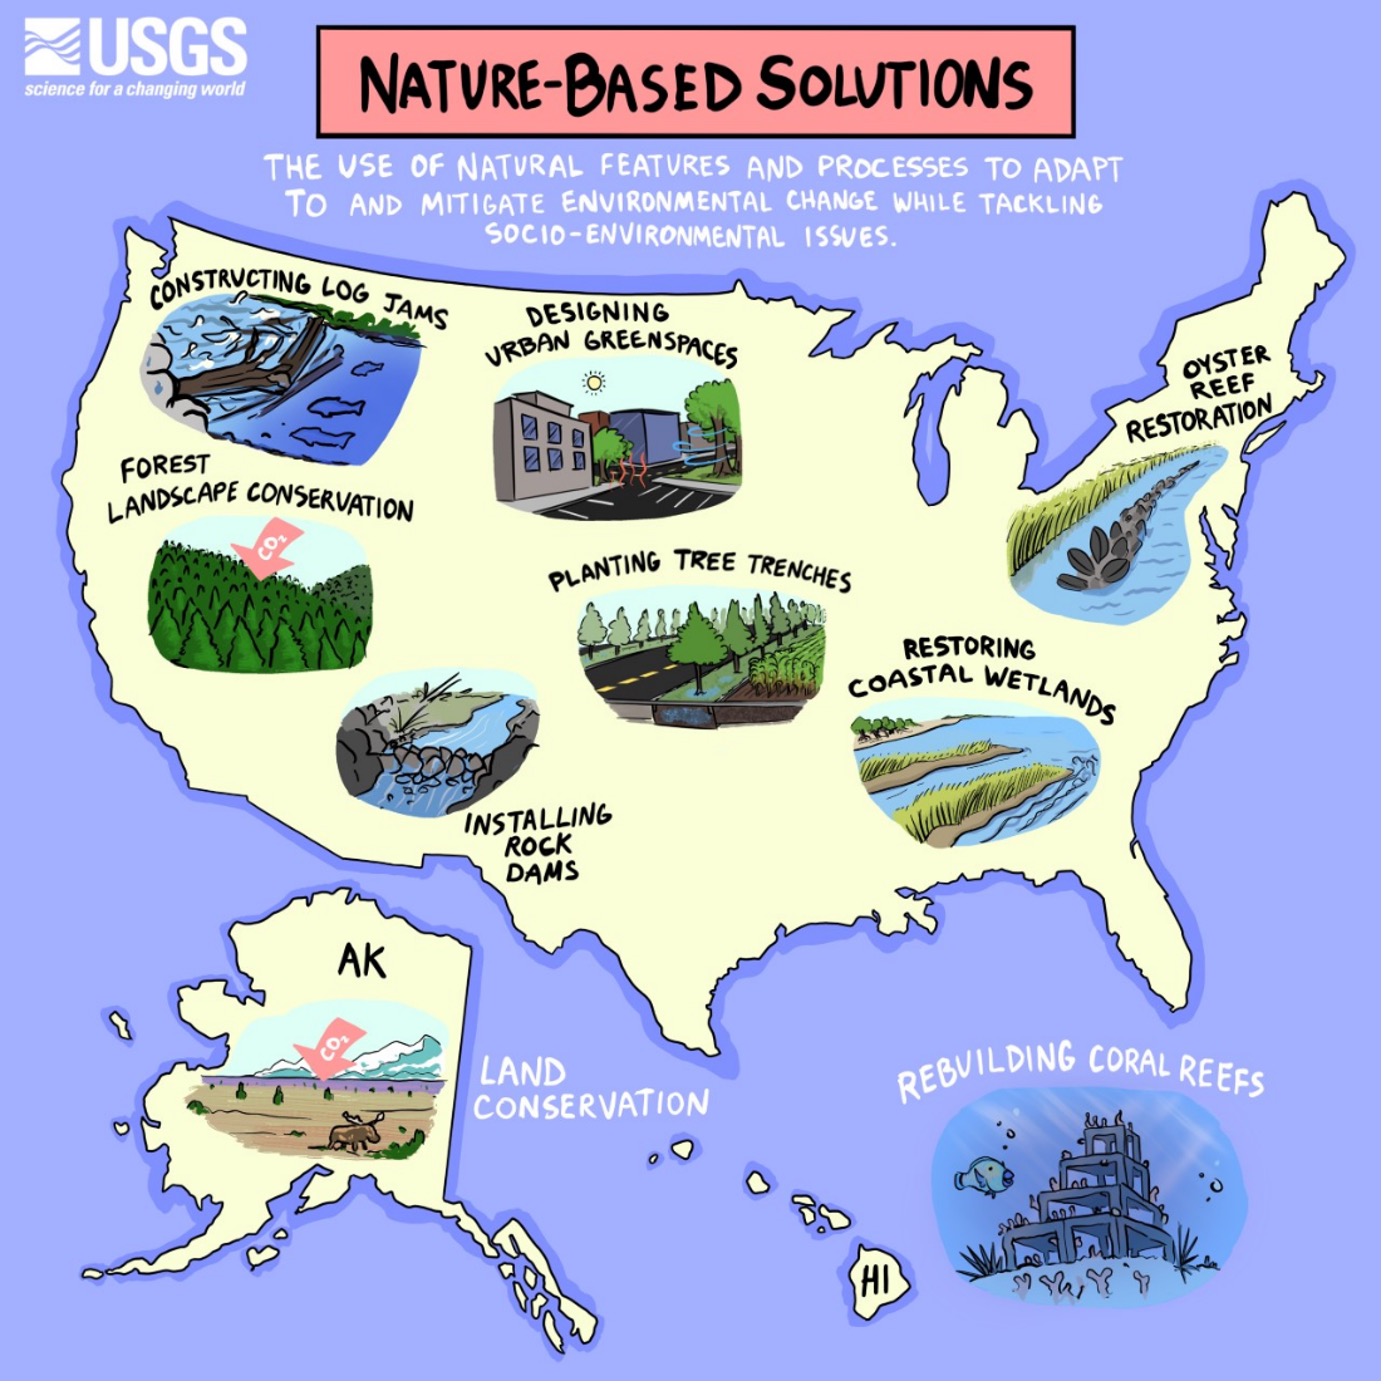 Infographic showing examples of types of nature-based solutions work by the Department of the Interior, overlaid across a line map of the United States.